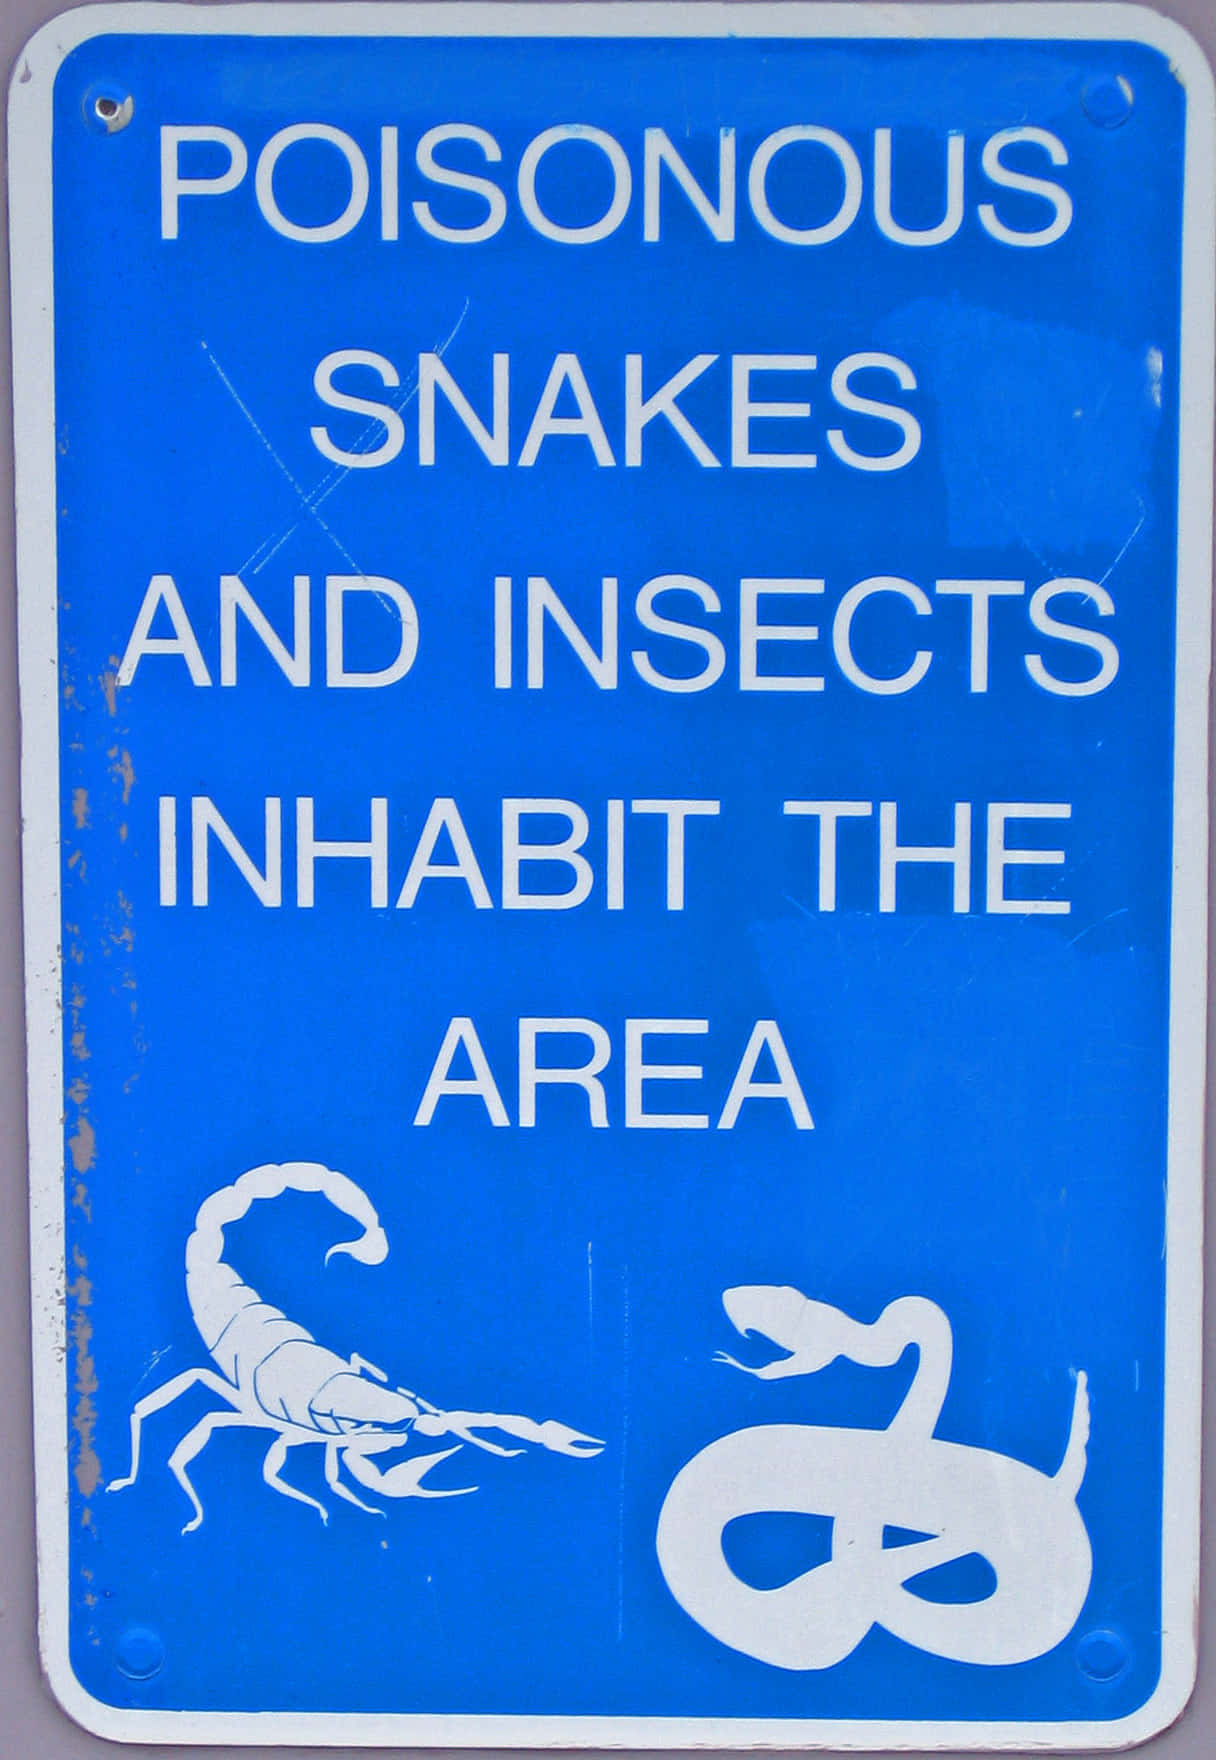 Snakes And Insects Safety Warning Picture